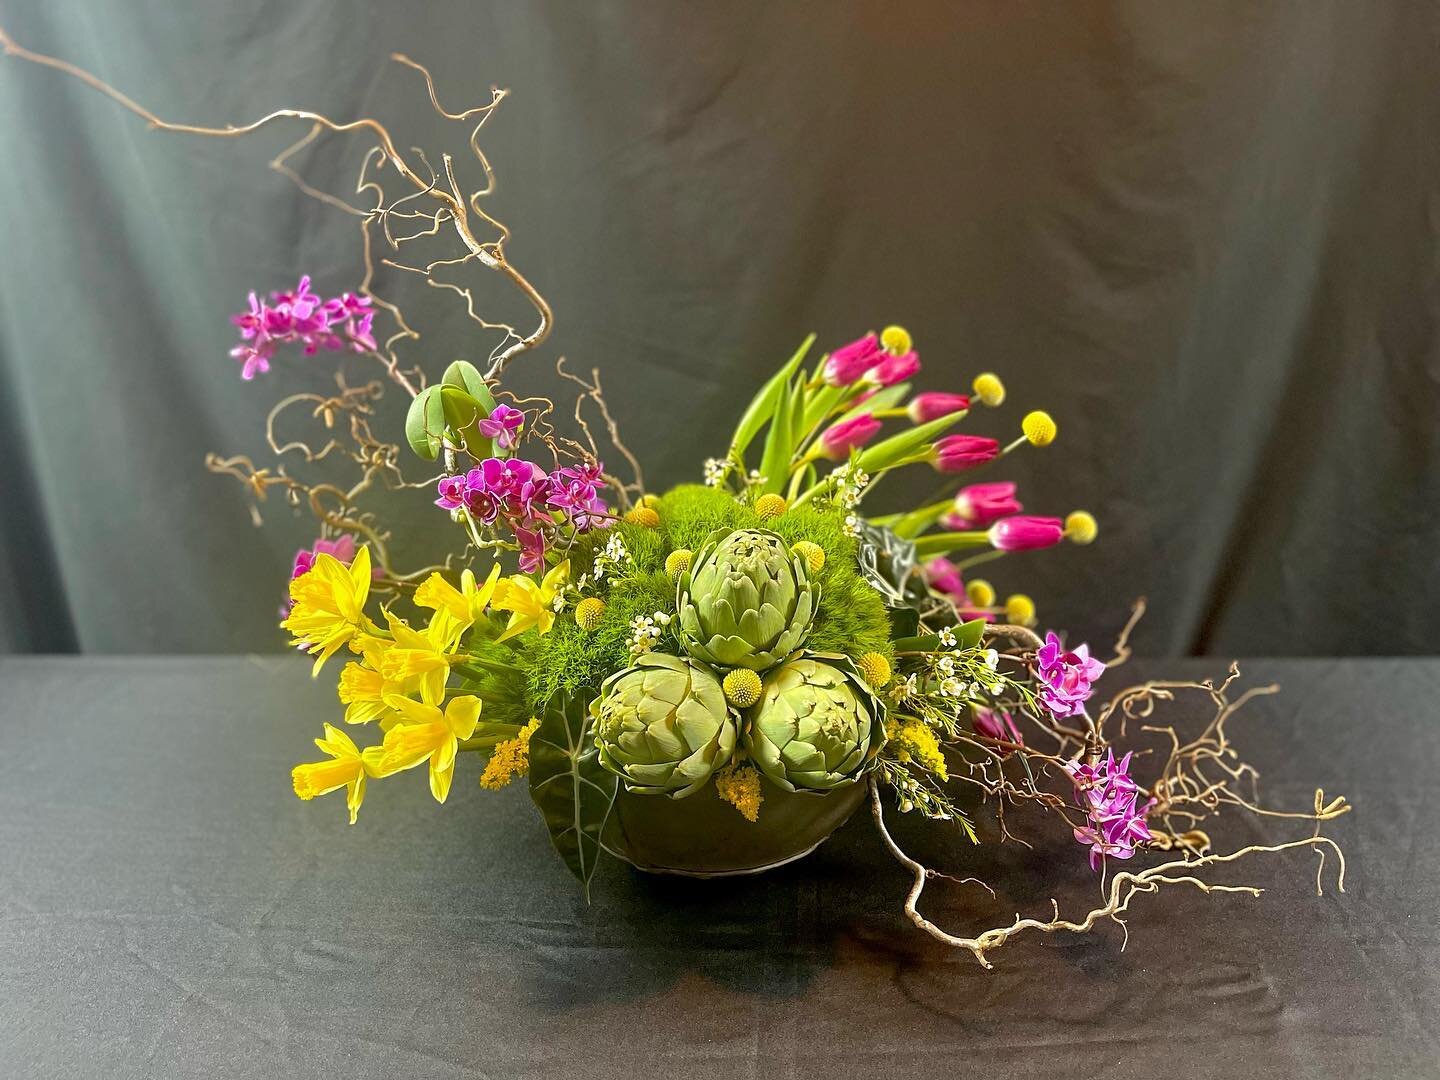 An ode to Spring. Warmer days are ahead of us!

#freshcutflowers #spring #flowers #floraldesign #arrangement #centerpiece #showstopper #daffodils #tulips #artichoke #bowl #fiddleleafflorals